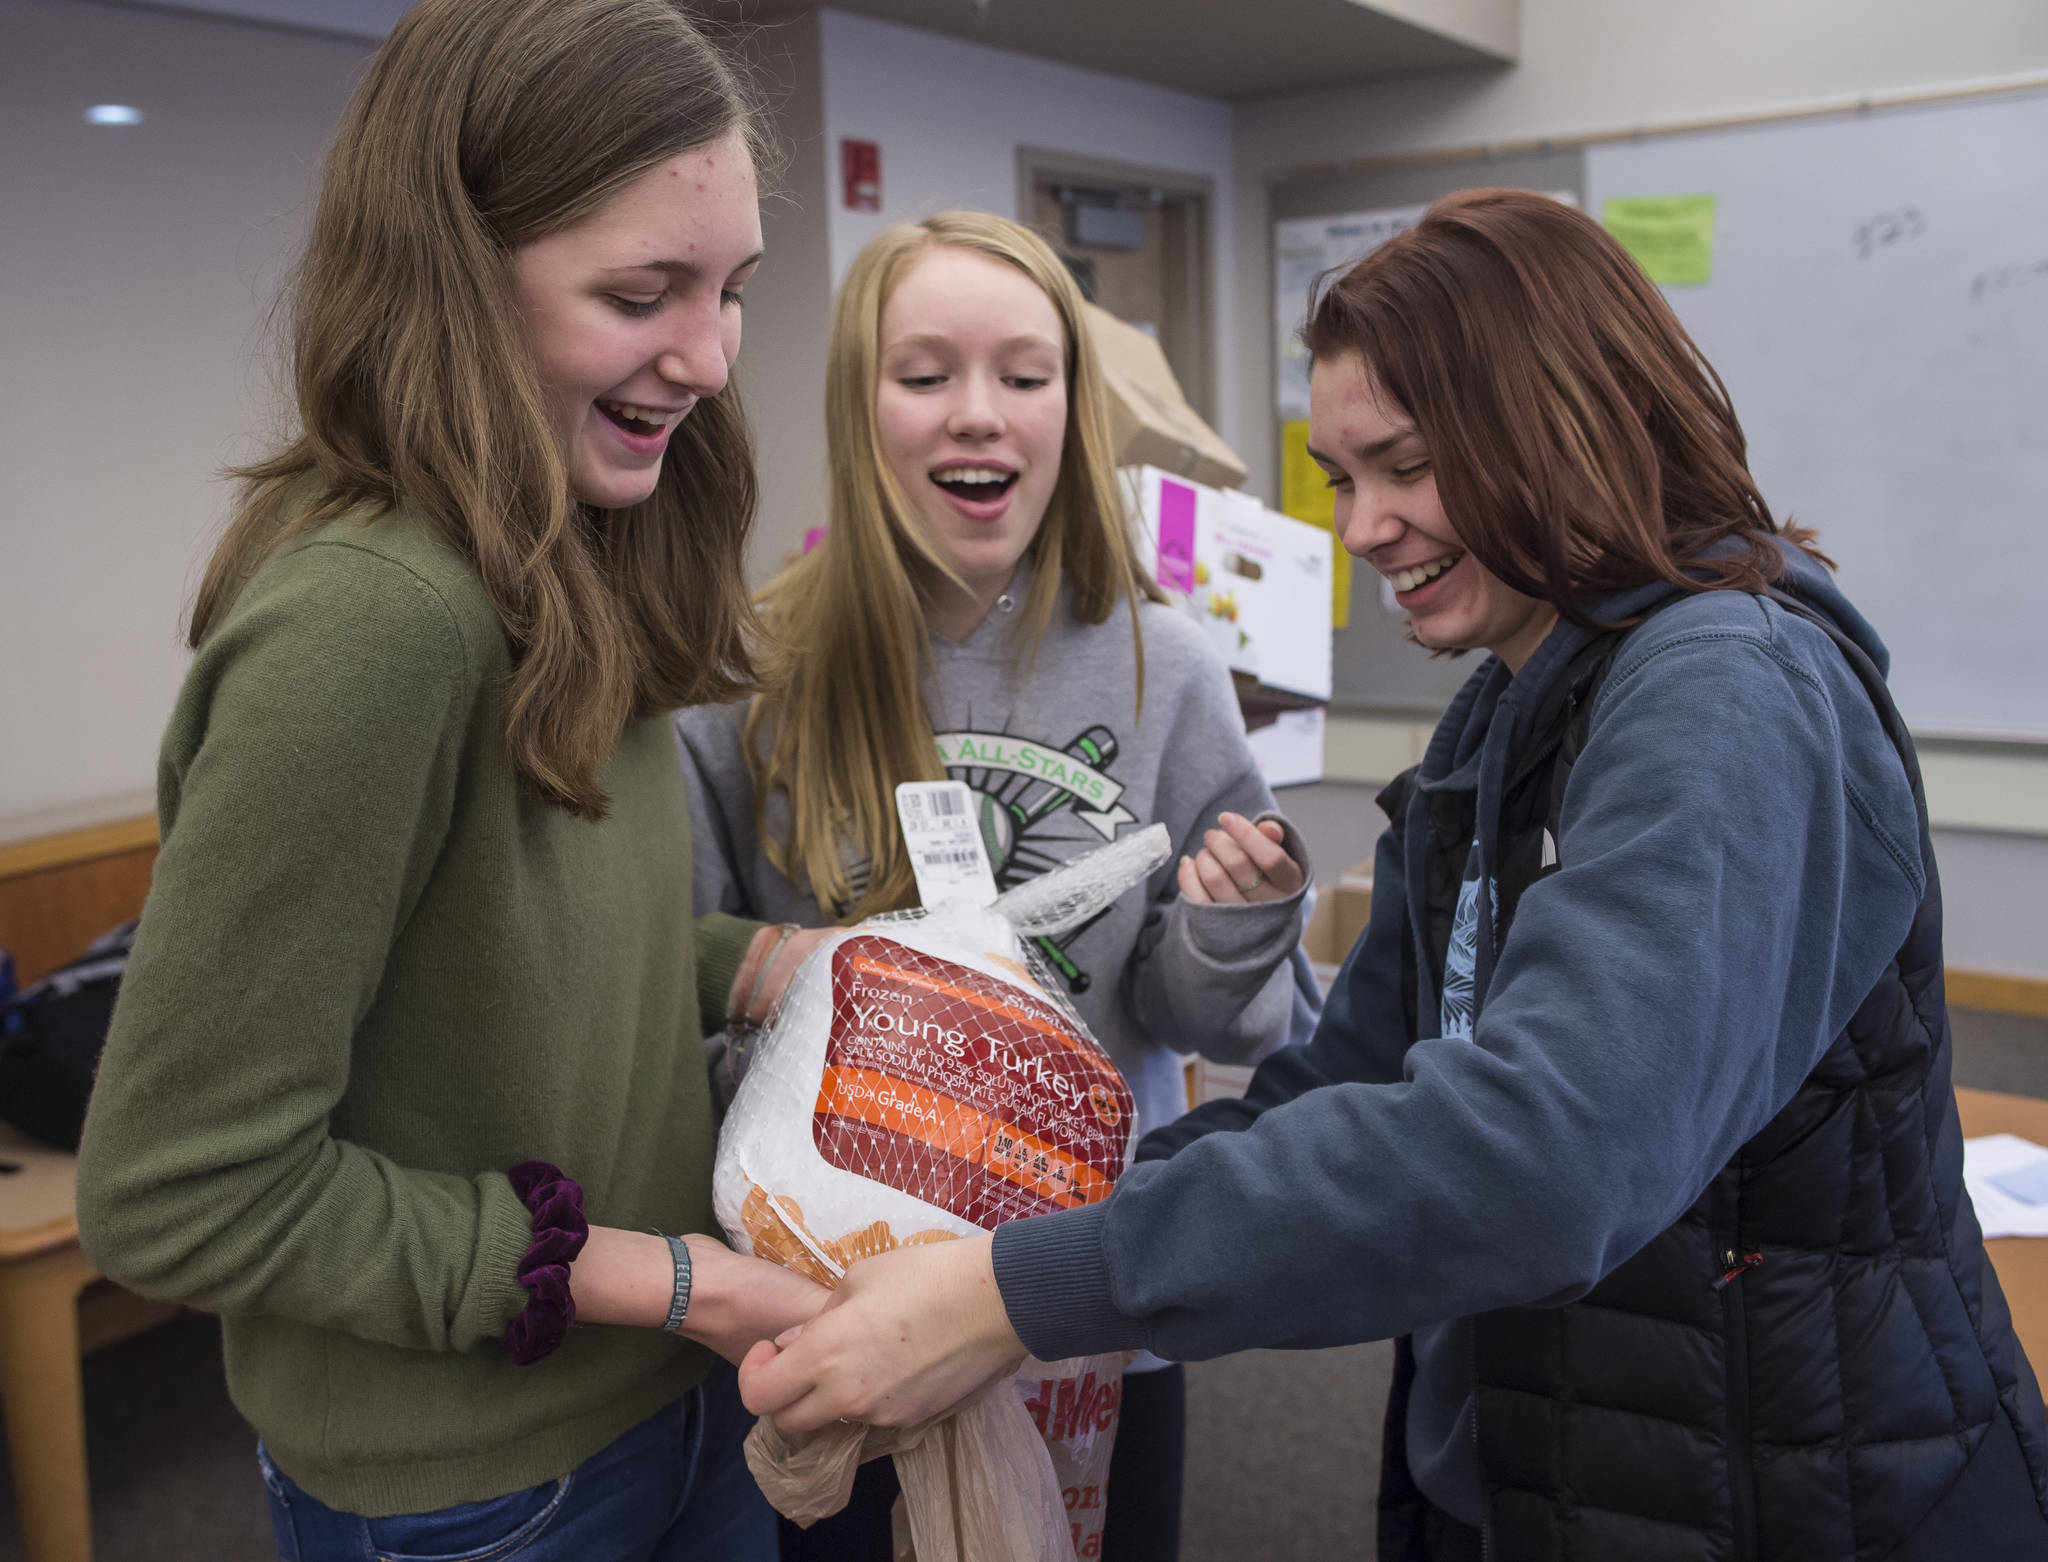 Juneau-Douglas High School freshmen Brooke Sanford, left, Margot Oliver, center, bag a turkey with senior Riley Stadt as they prepare Thanksgiving dinner boxes to be donated to AWARE and The Glory Hall on Tuesday, Nov. 20, 2018. The JDHS chapter of Sources of Strength, a nationwide organization that promotes positivity in schools donated seven boxes to the organizations. Students from every homeroom contributed food. (Michael Penn | Juneau Empire)